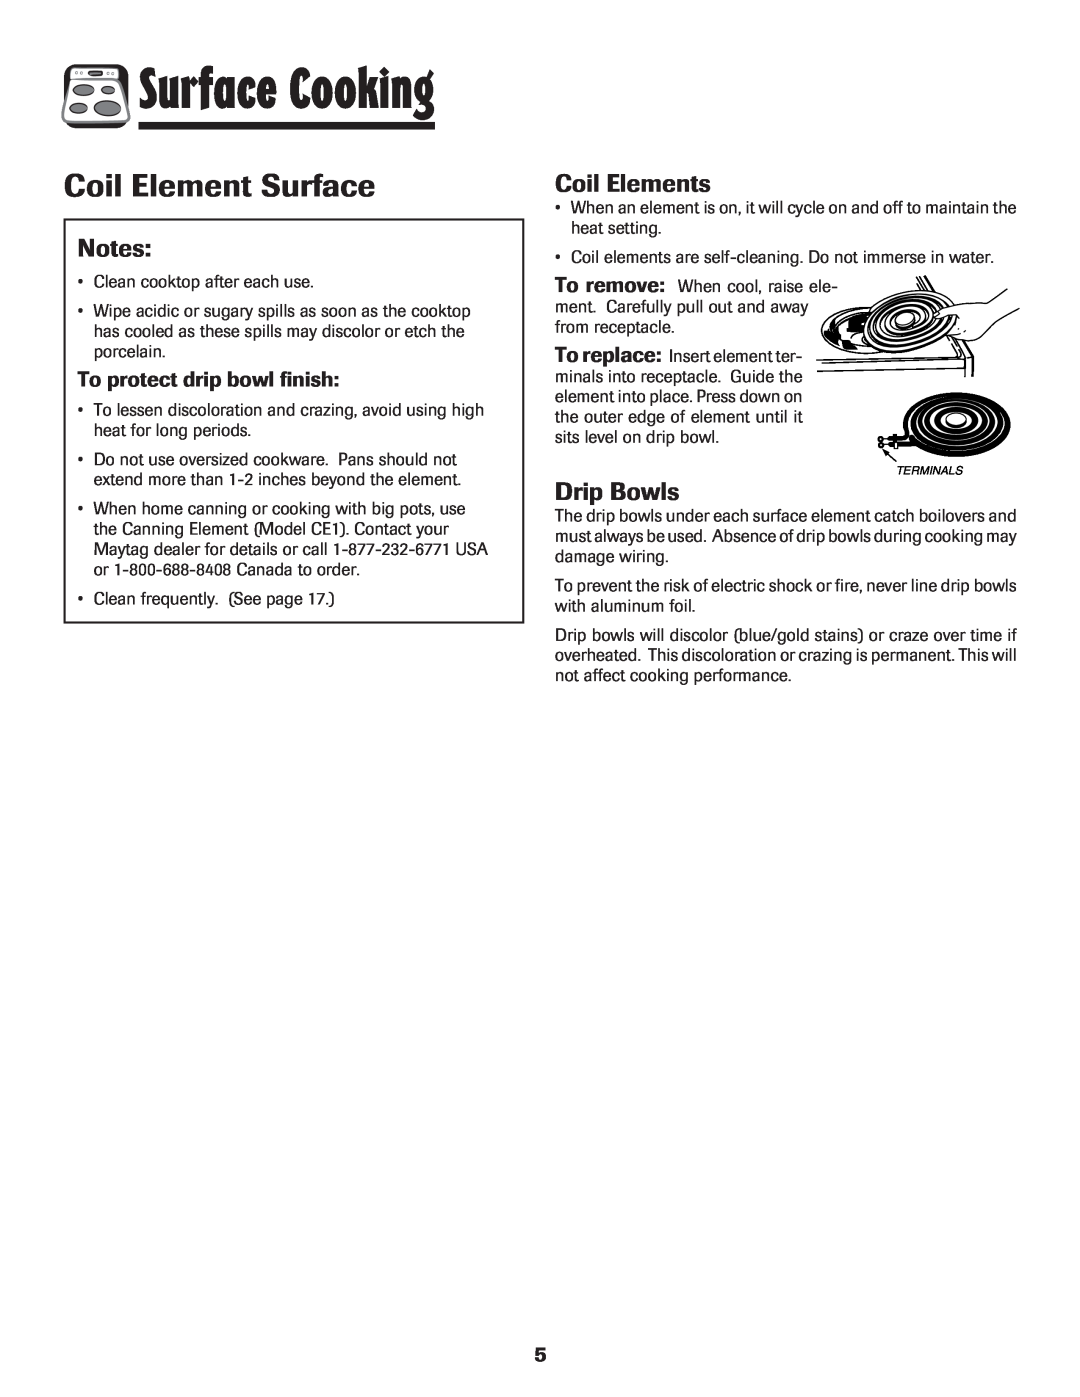 Maytag MER5552BAW warranty Coil Element Surface, Coil Elements, Drip Bowls, To protect drip bowl finish, Surface Cooking 